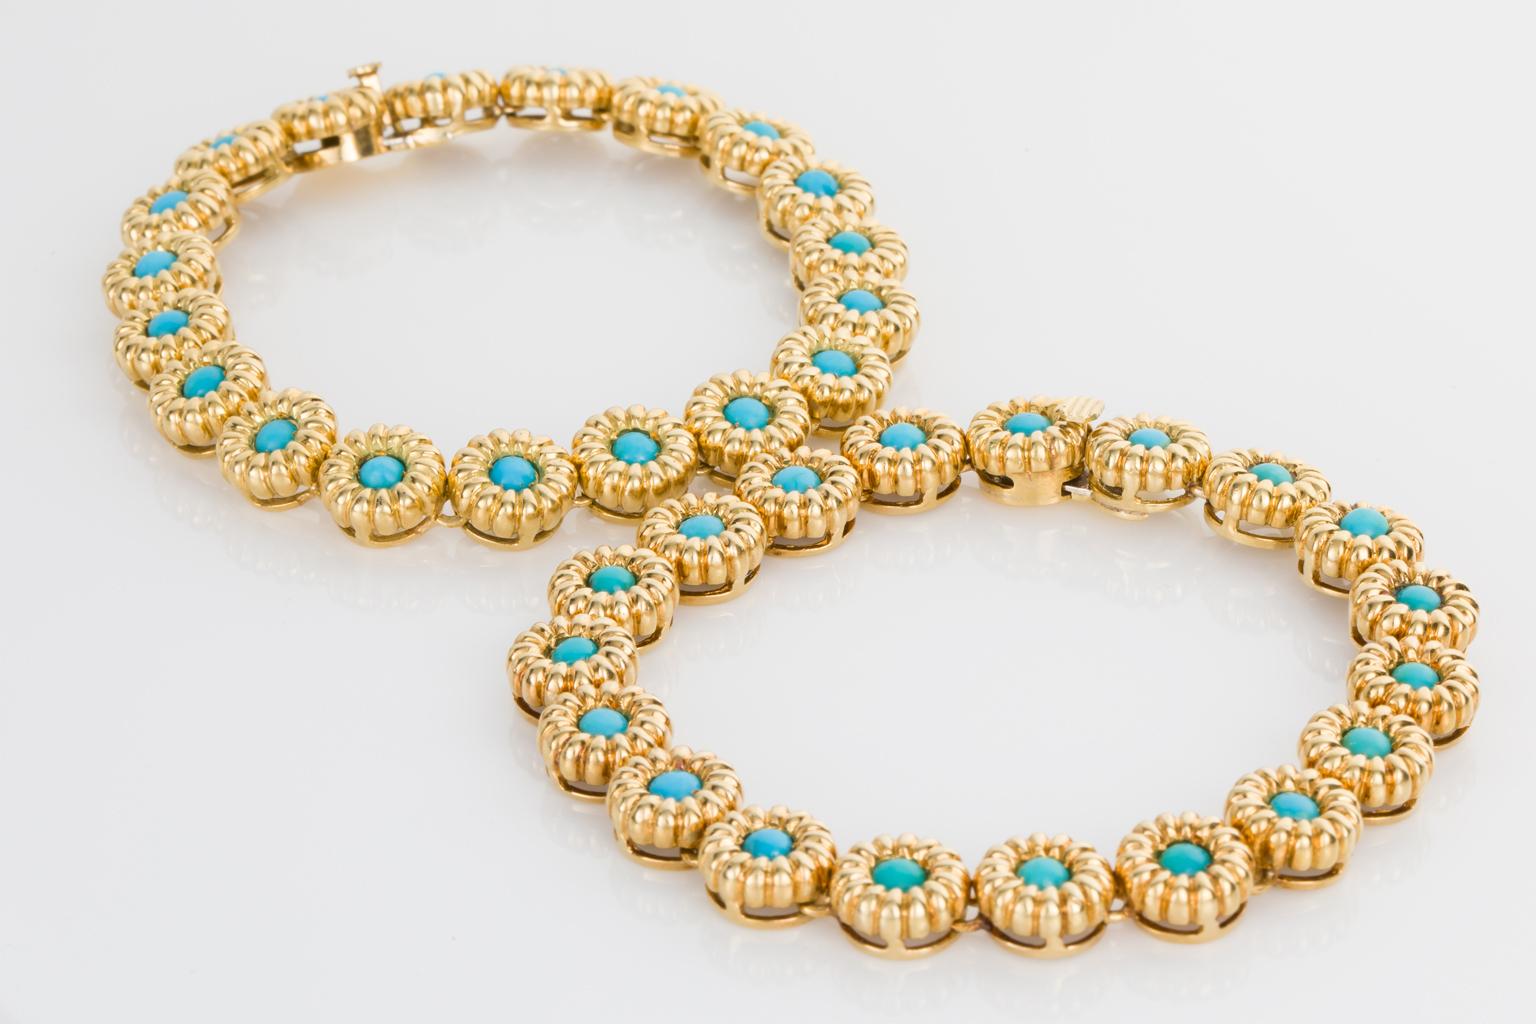 18 Karat Yellow Gold Turquoise Bracelets or Choker Necklace For Sale 5